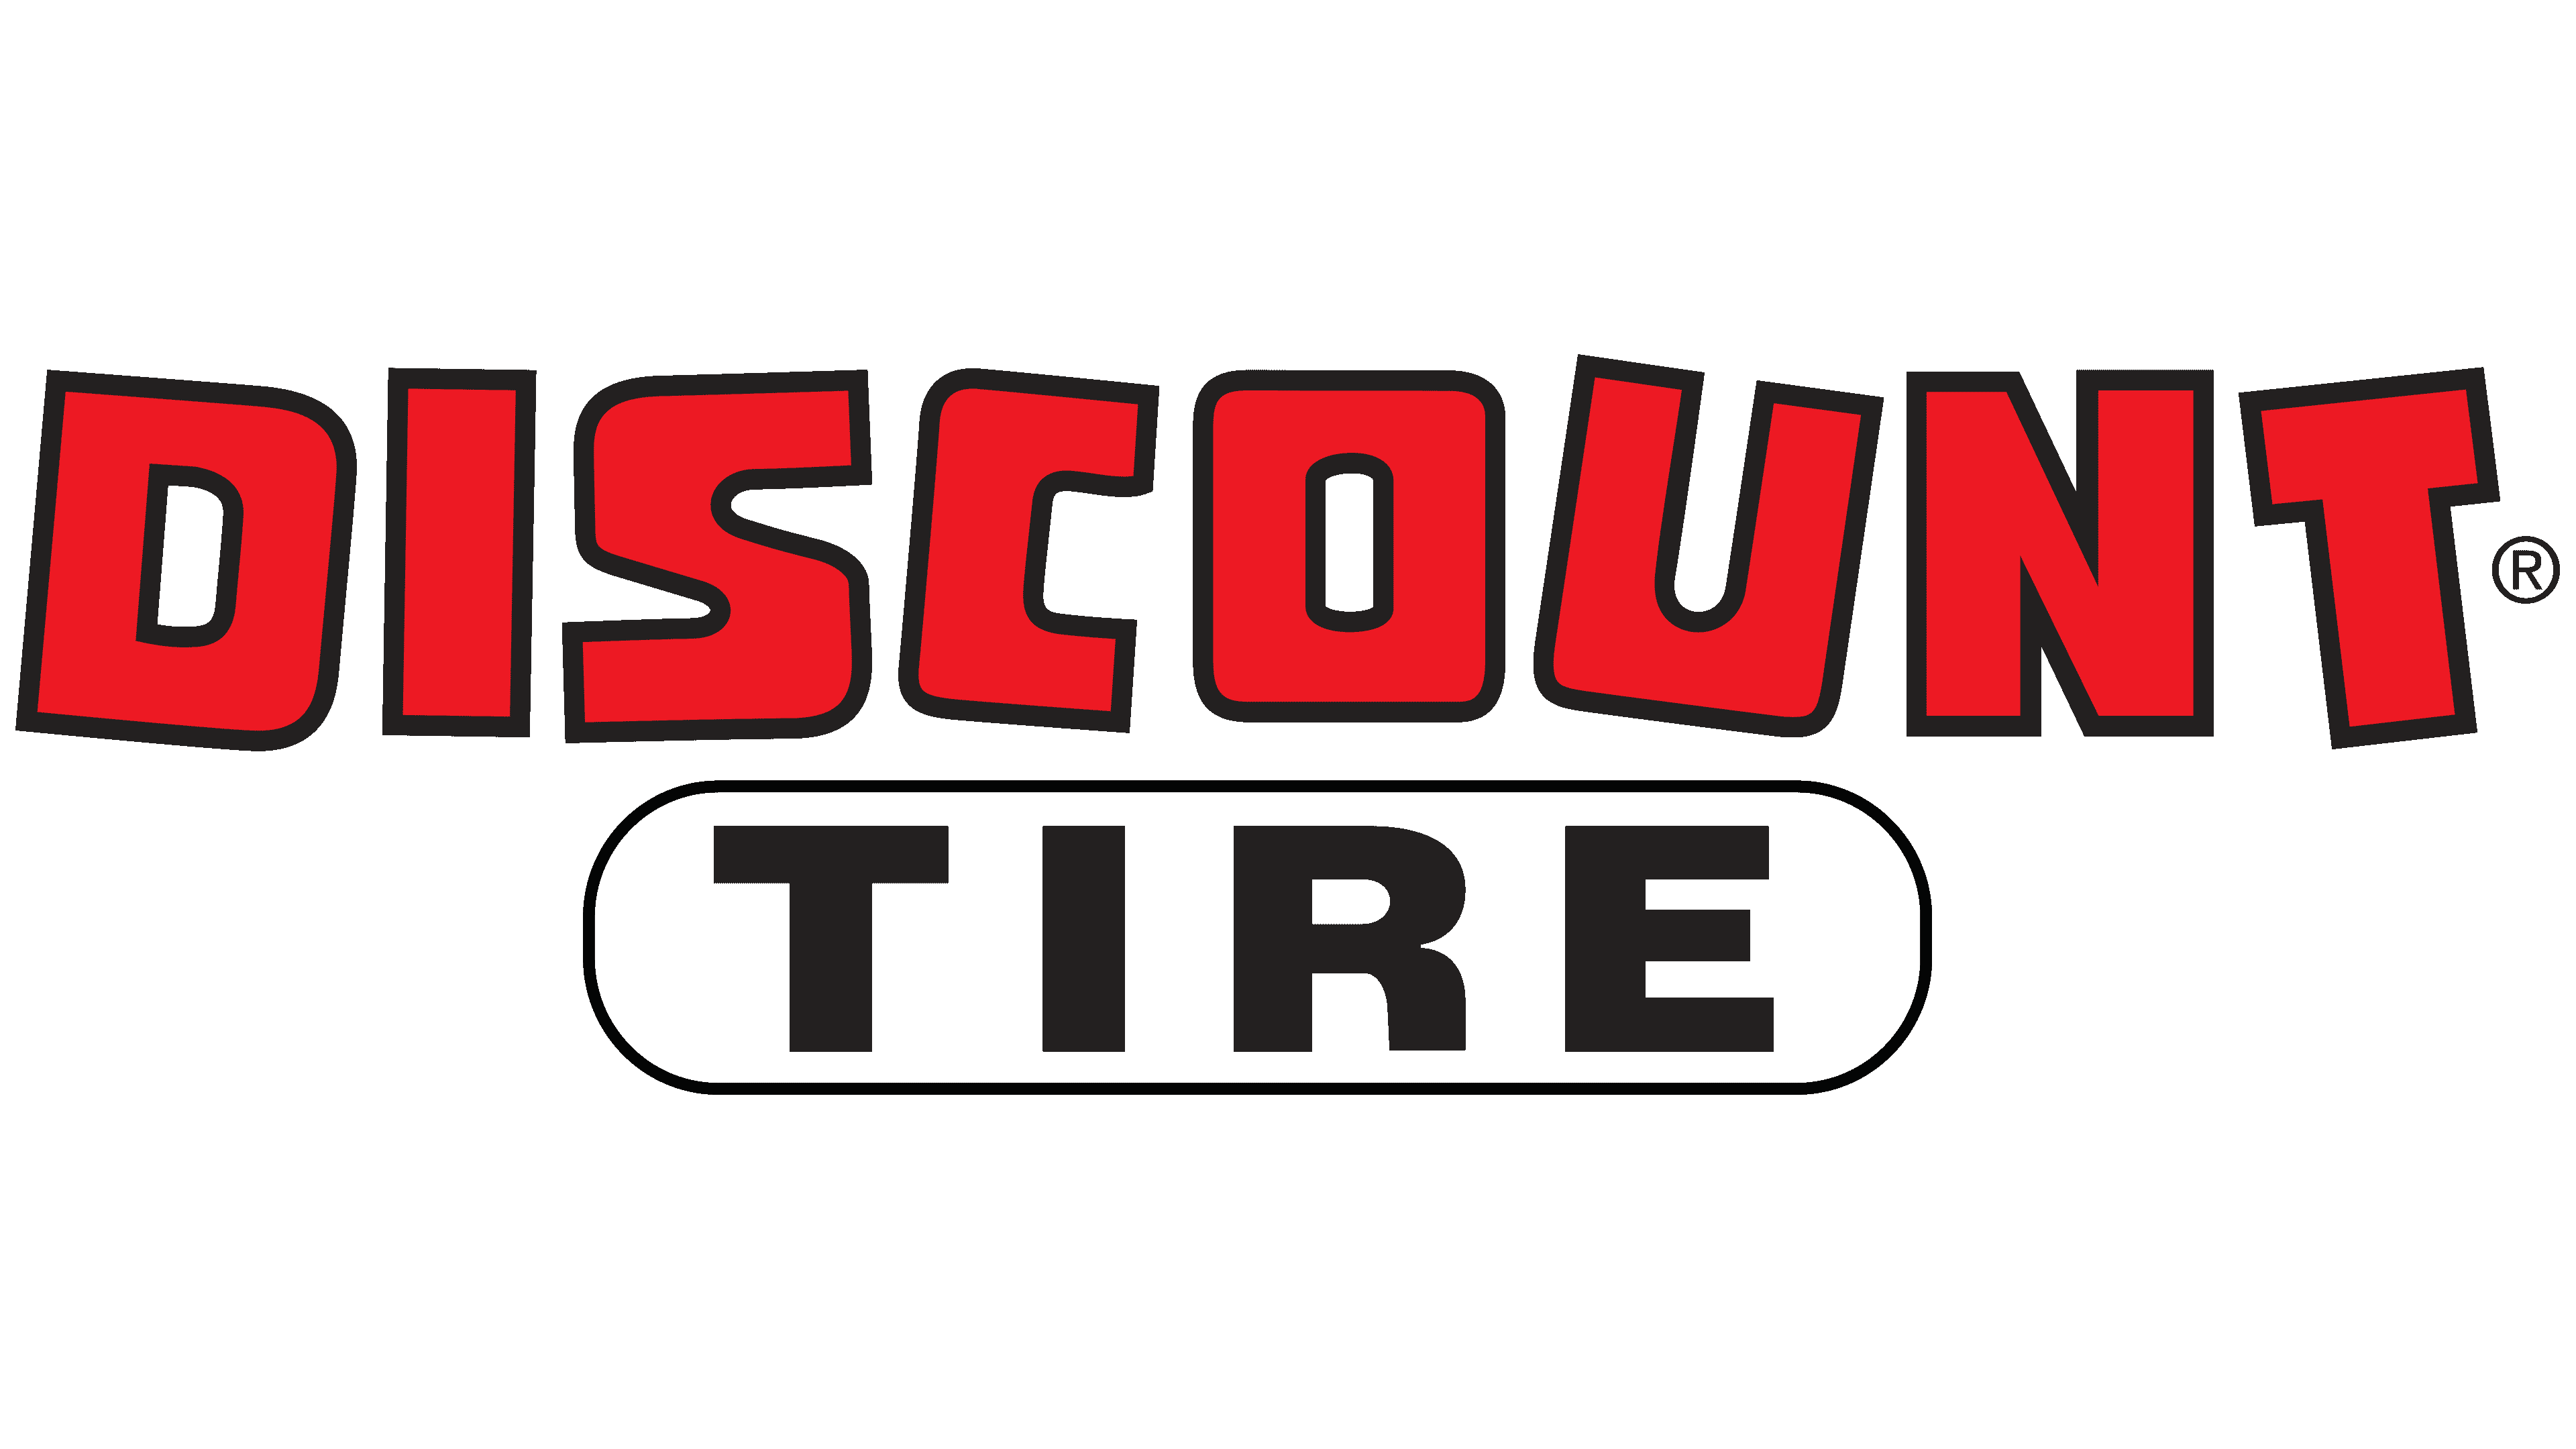 Discount Tire Logo, symbol, meaning, history, PNG, brand